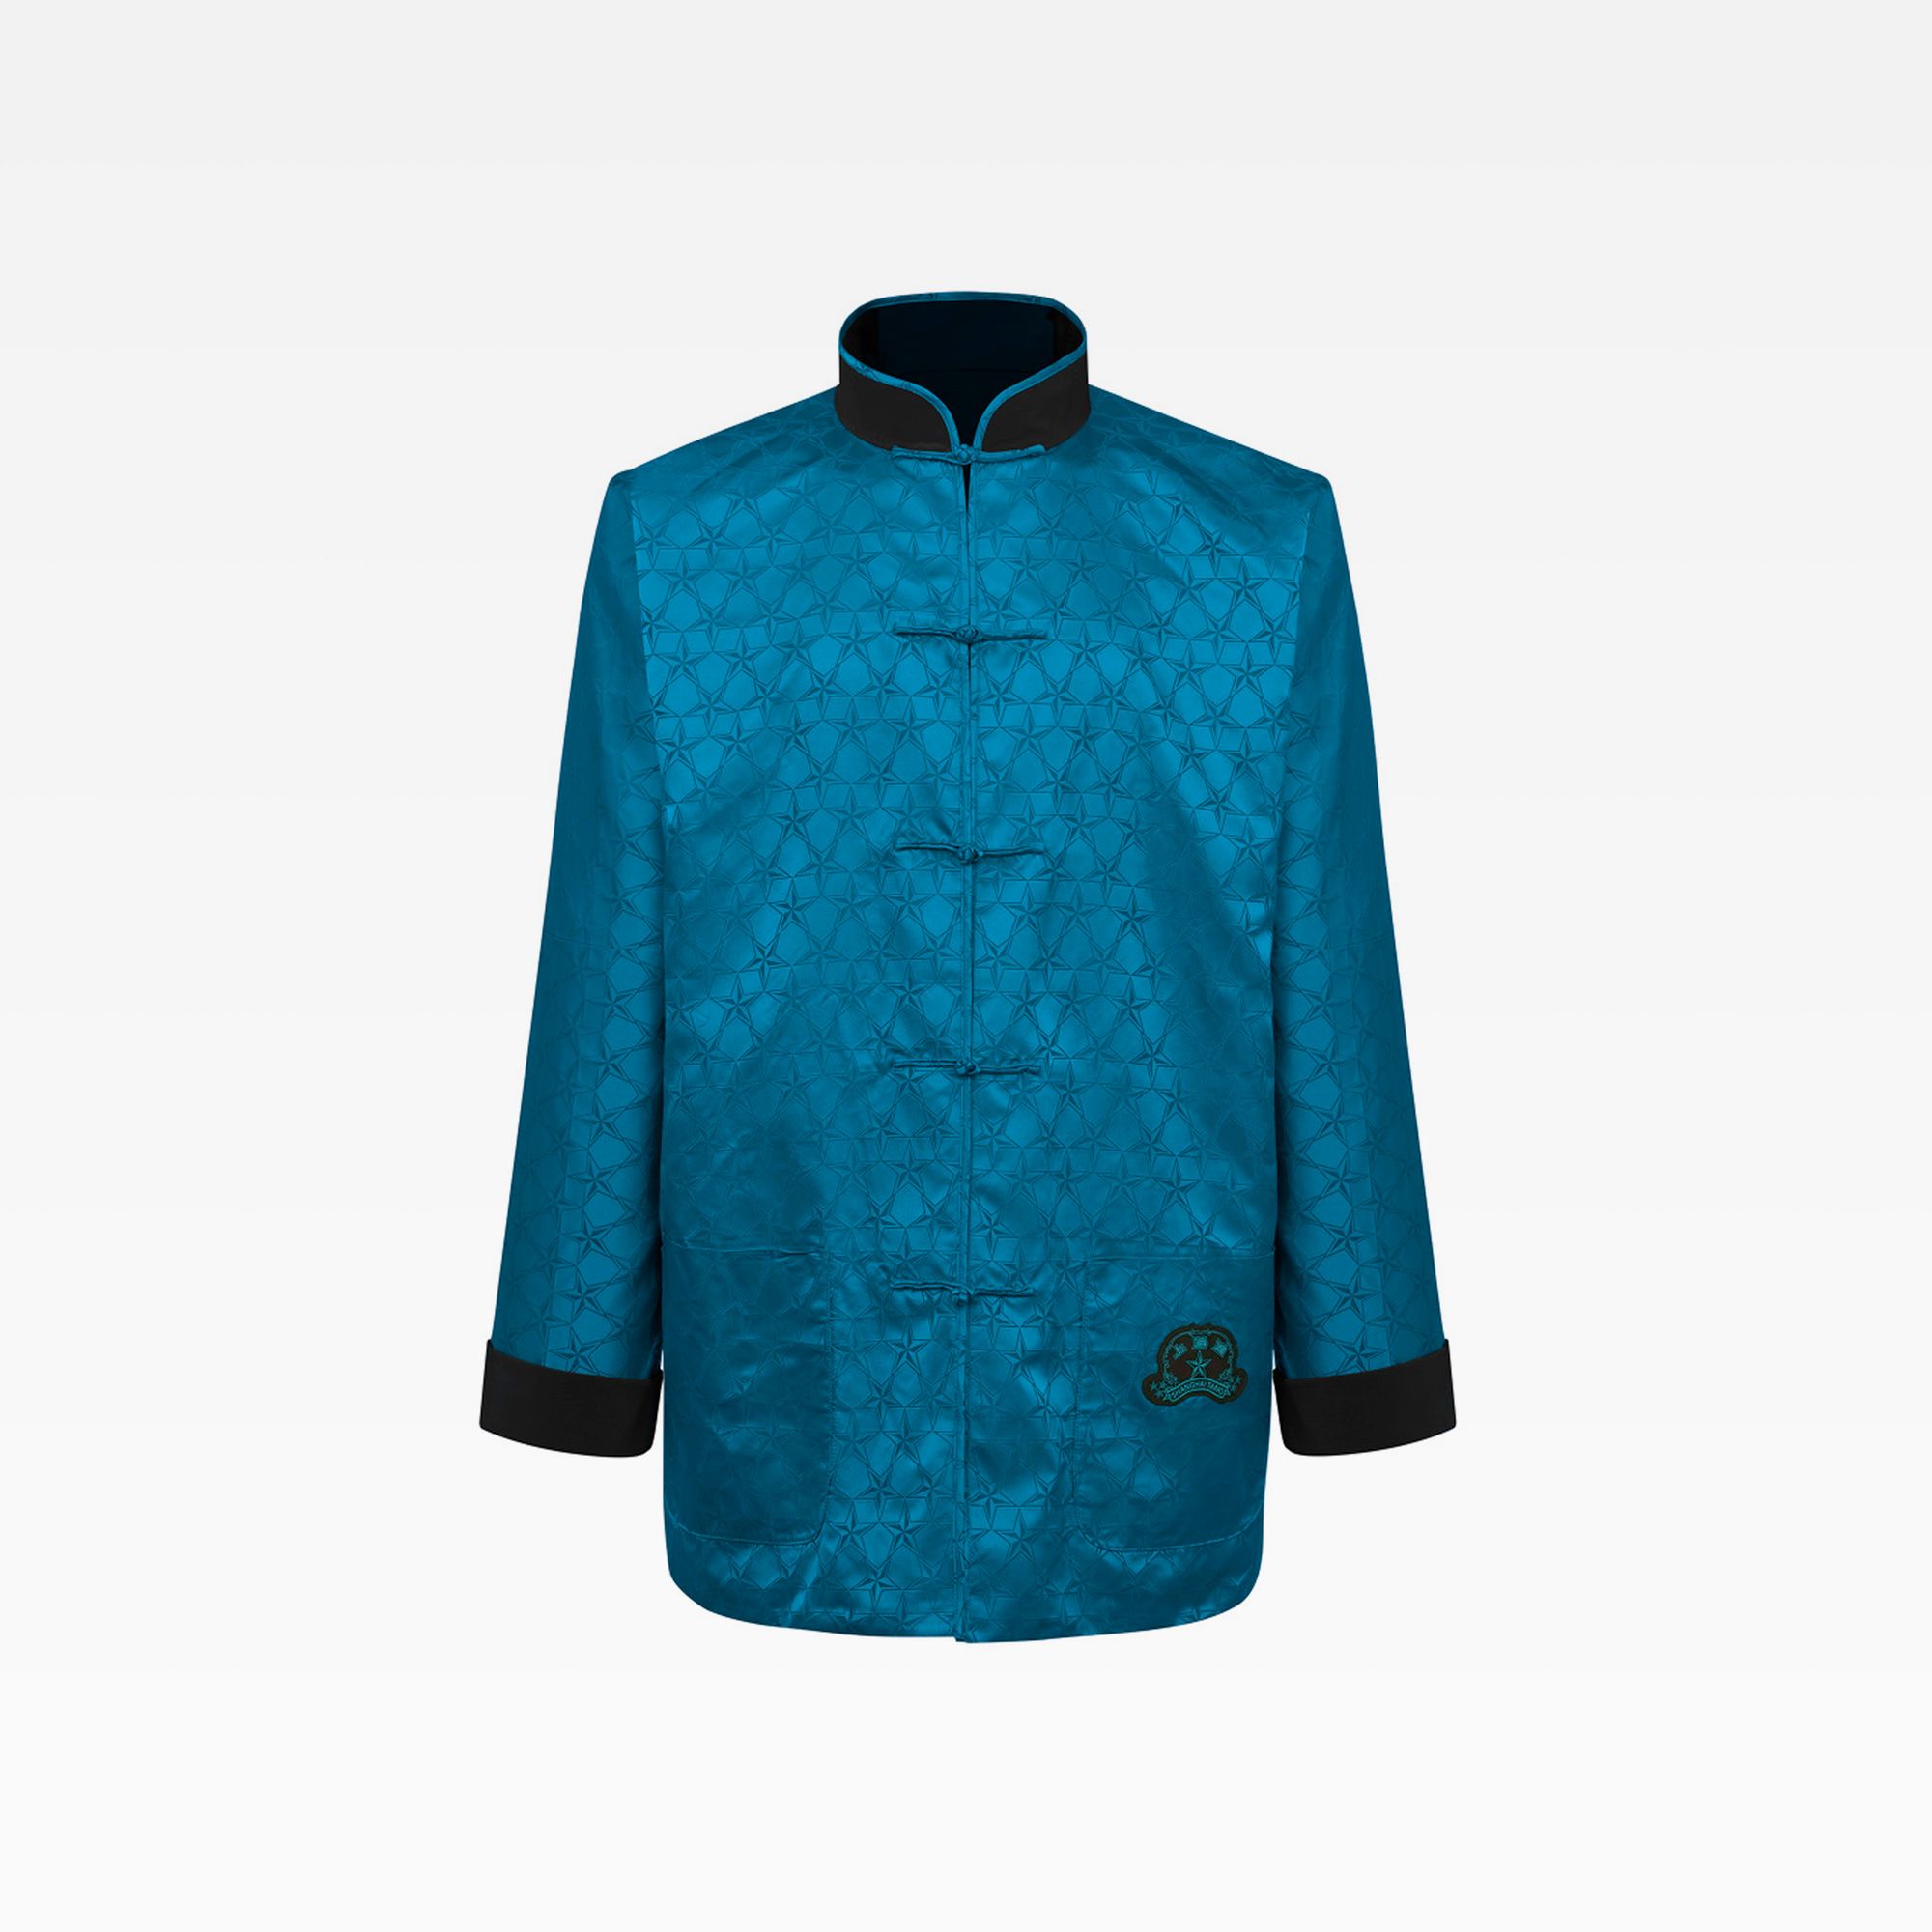 'Five Elements' Double-Sided Silk Tang Jacket | Shanghai Tang